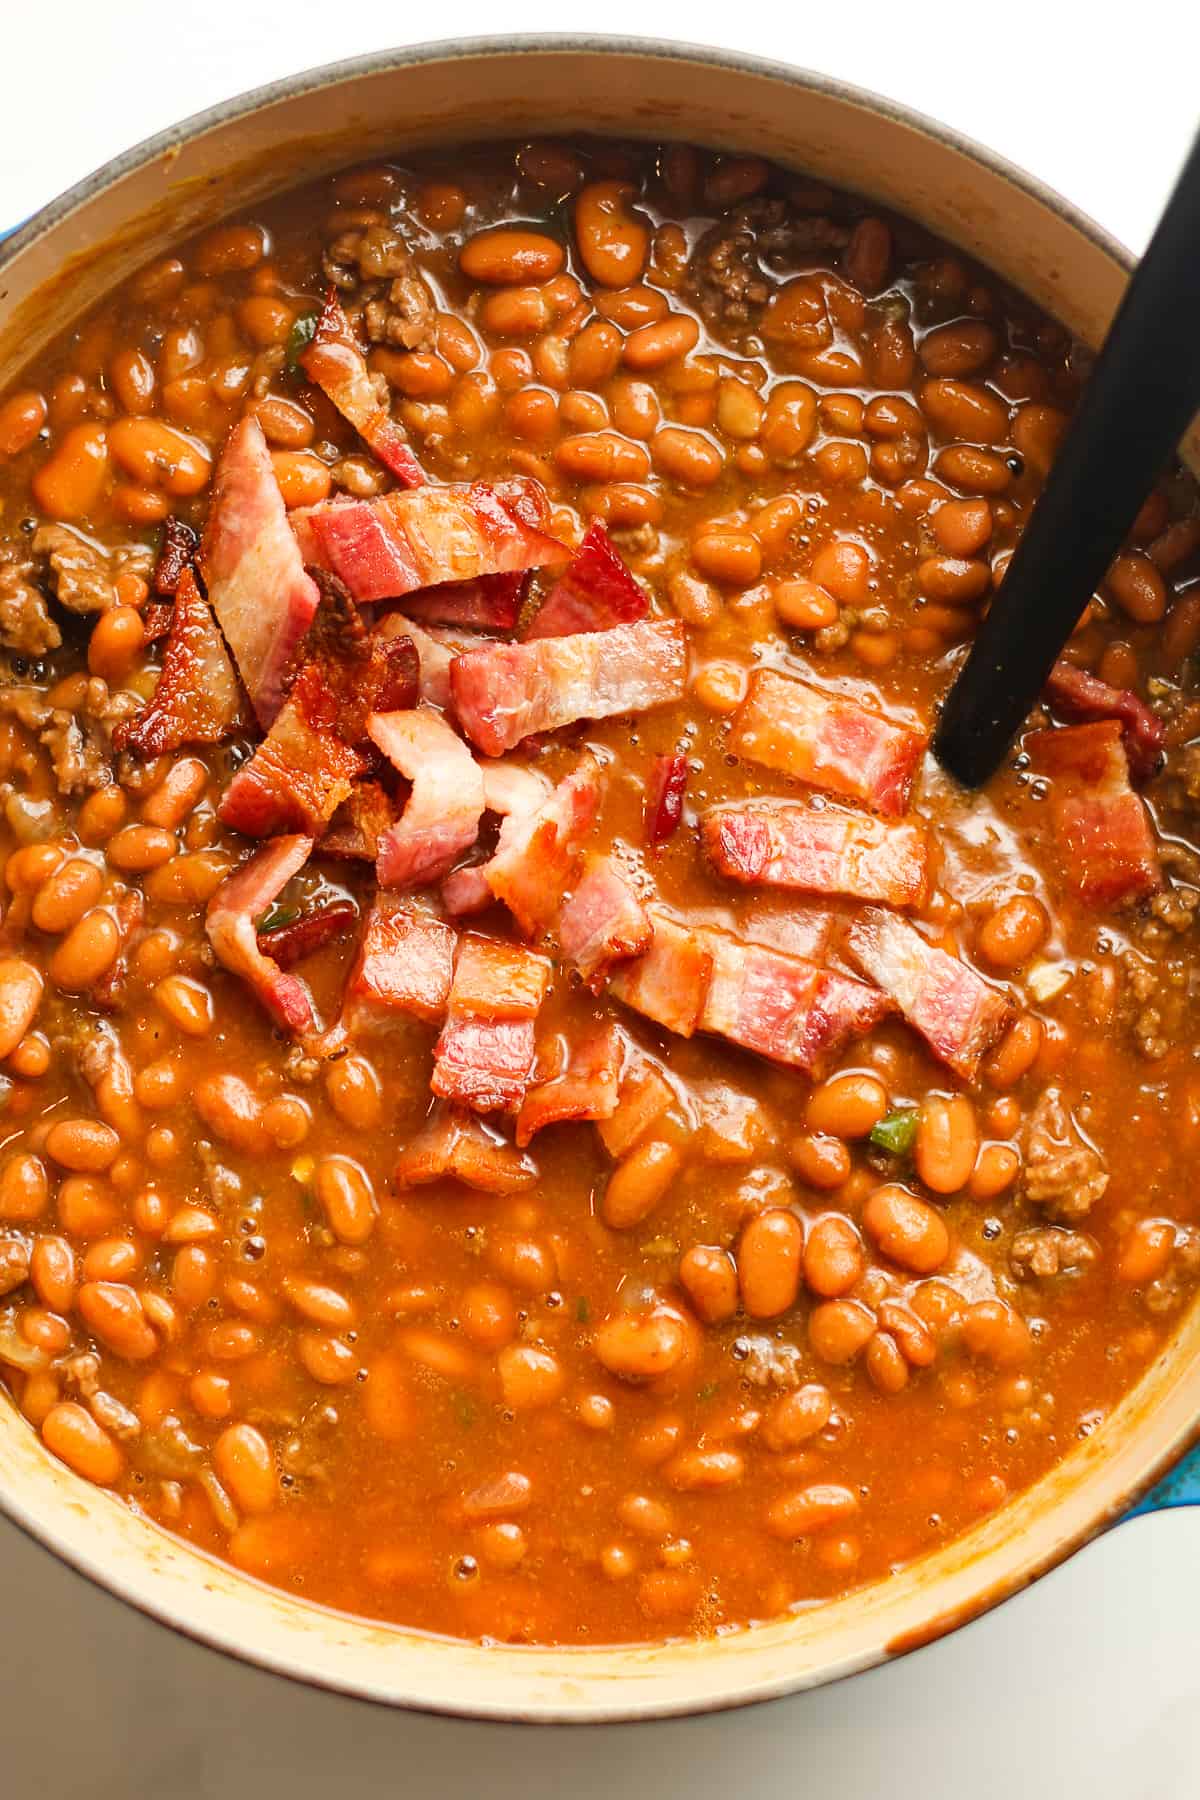 The beans with cooked bacon on top.